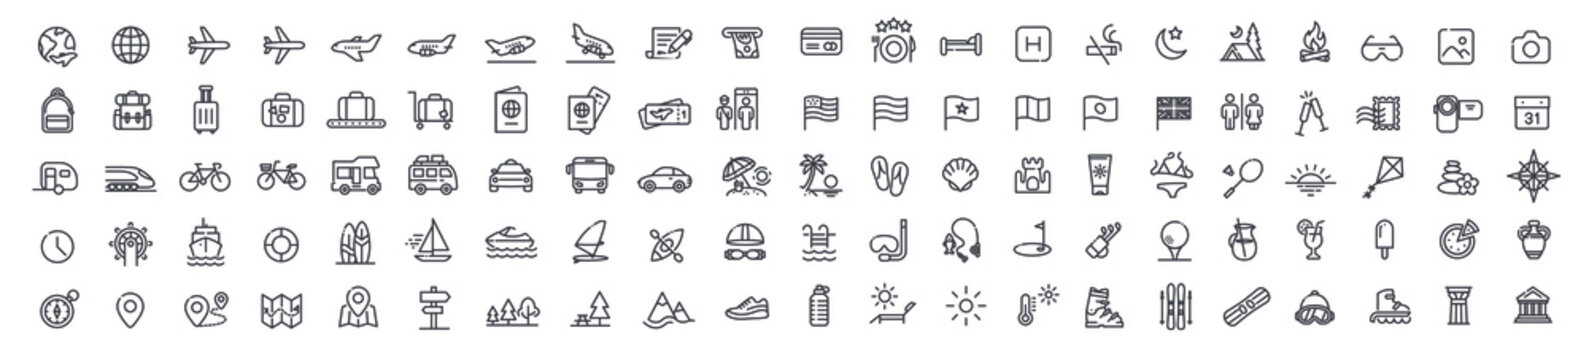 Set of 105 travel icons, thin line style, vector illustration